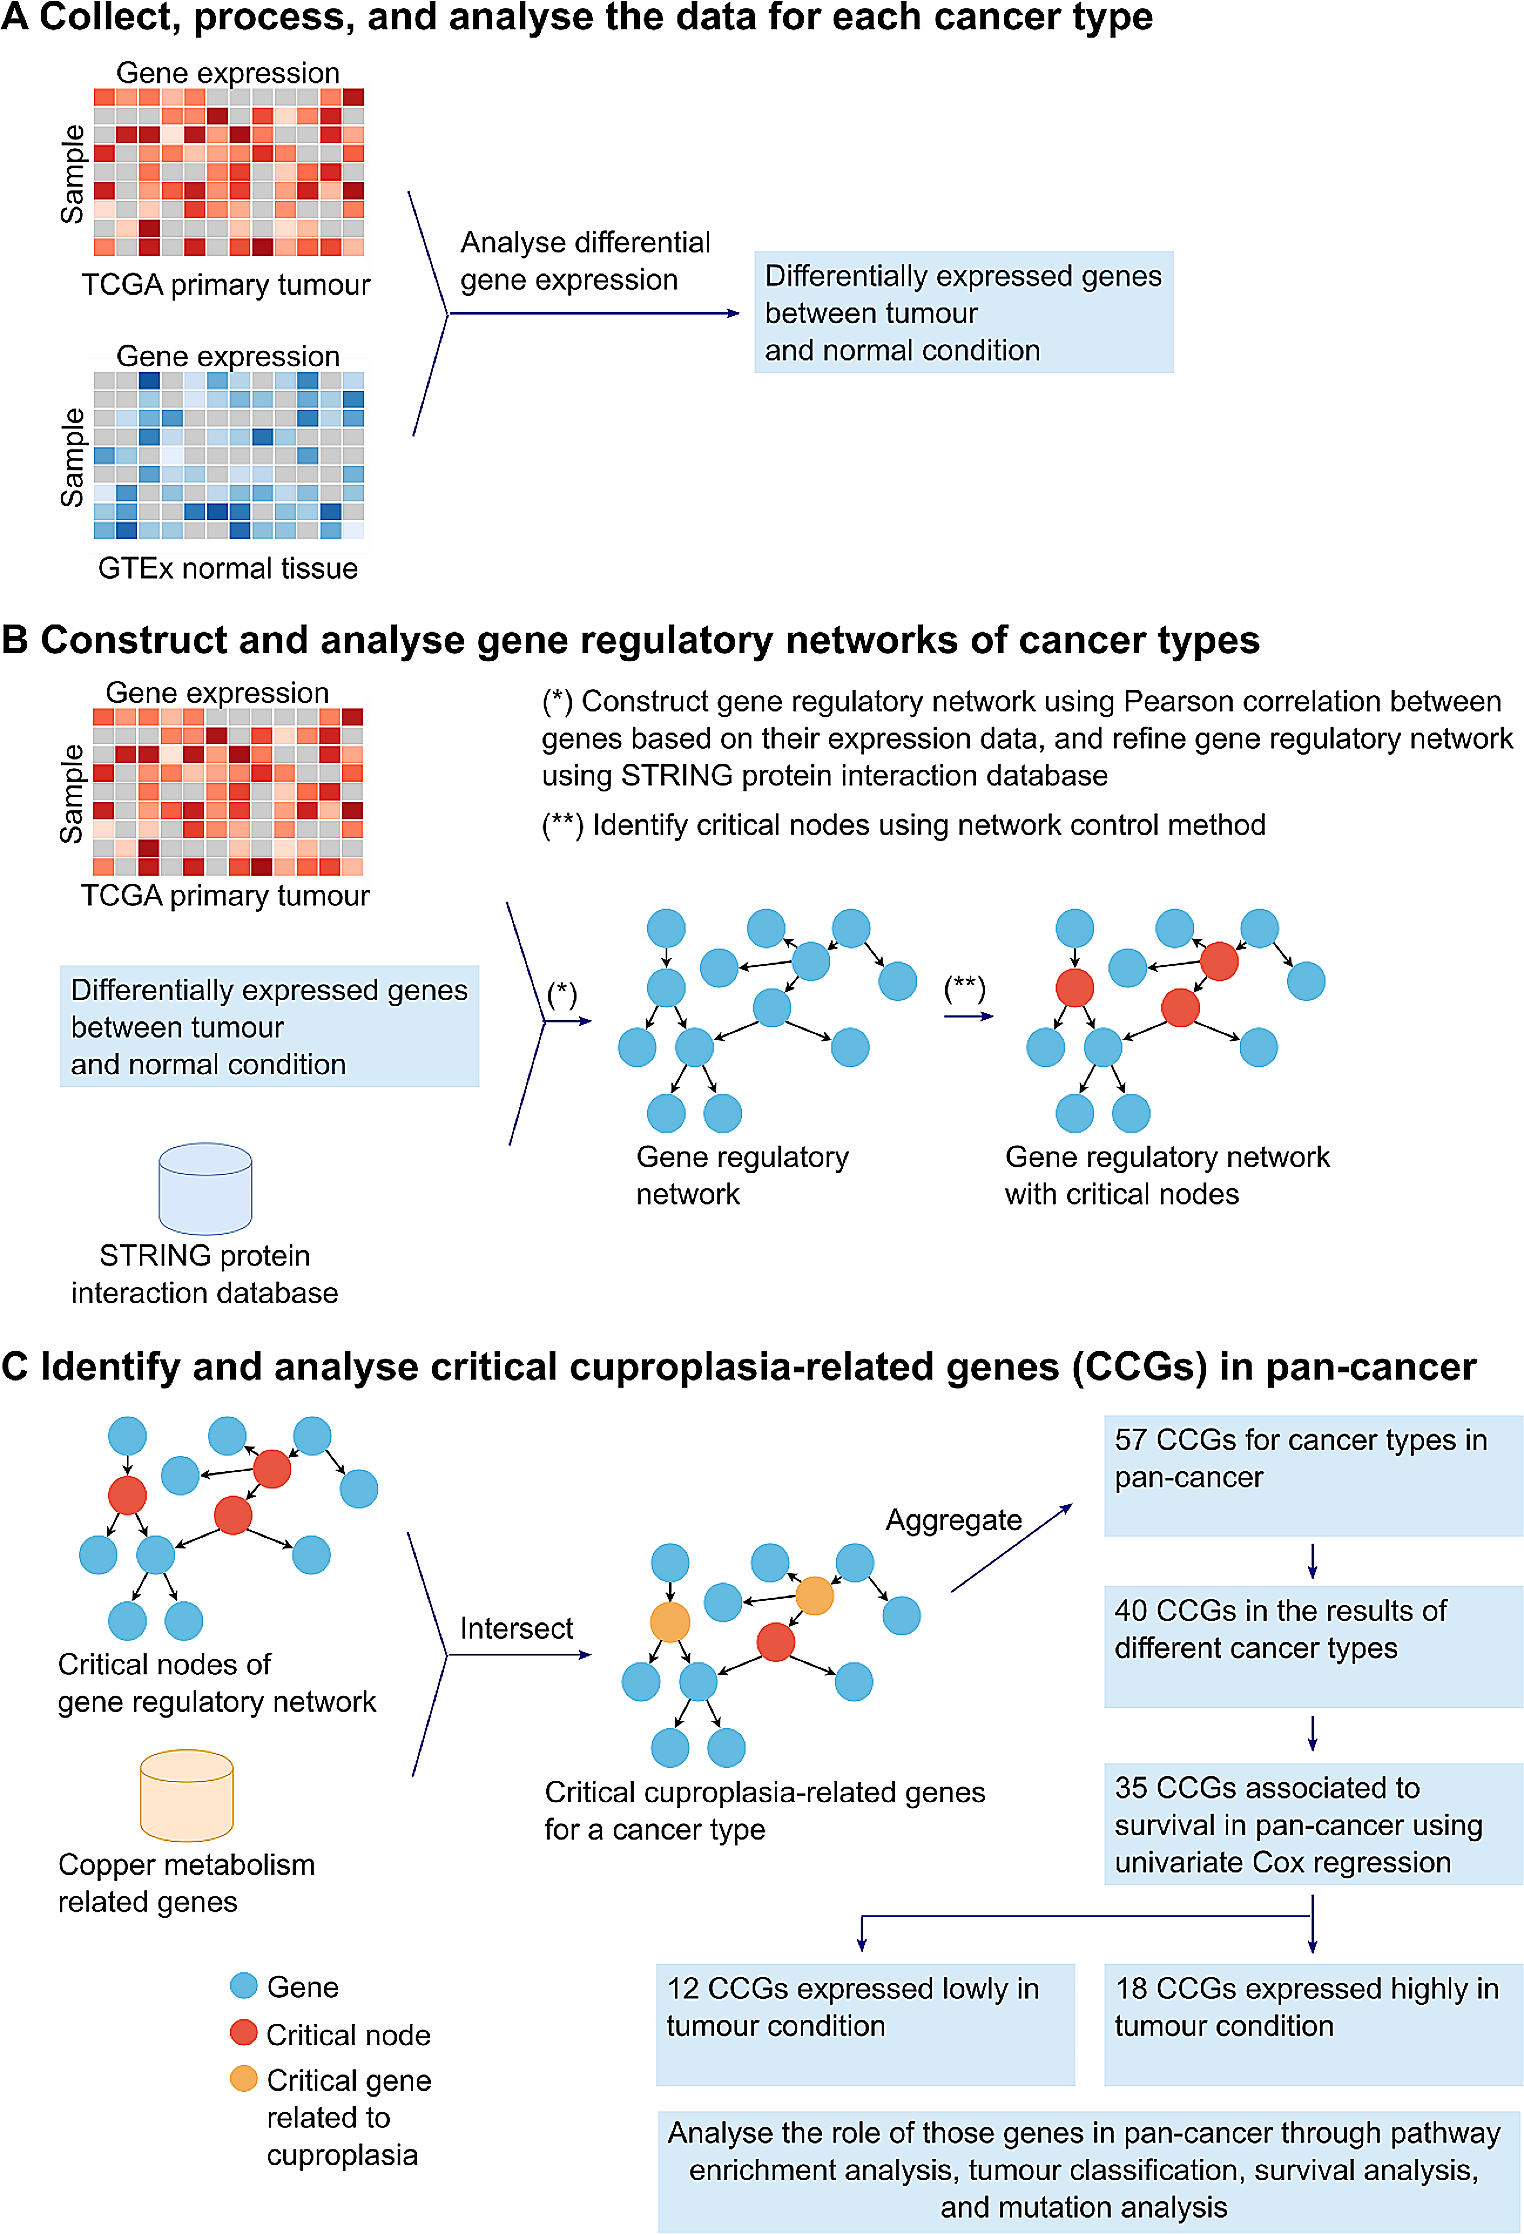 A novel network-based method identifies a cuproplasia-related pan-cancer gene signature to predict patient outcome